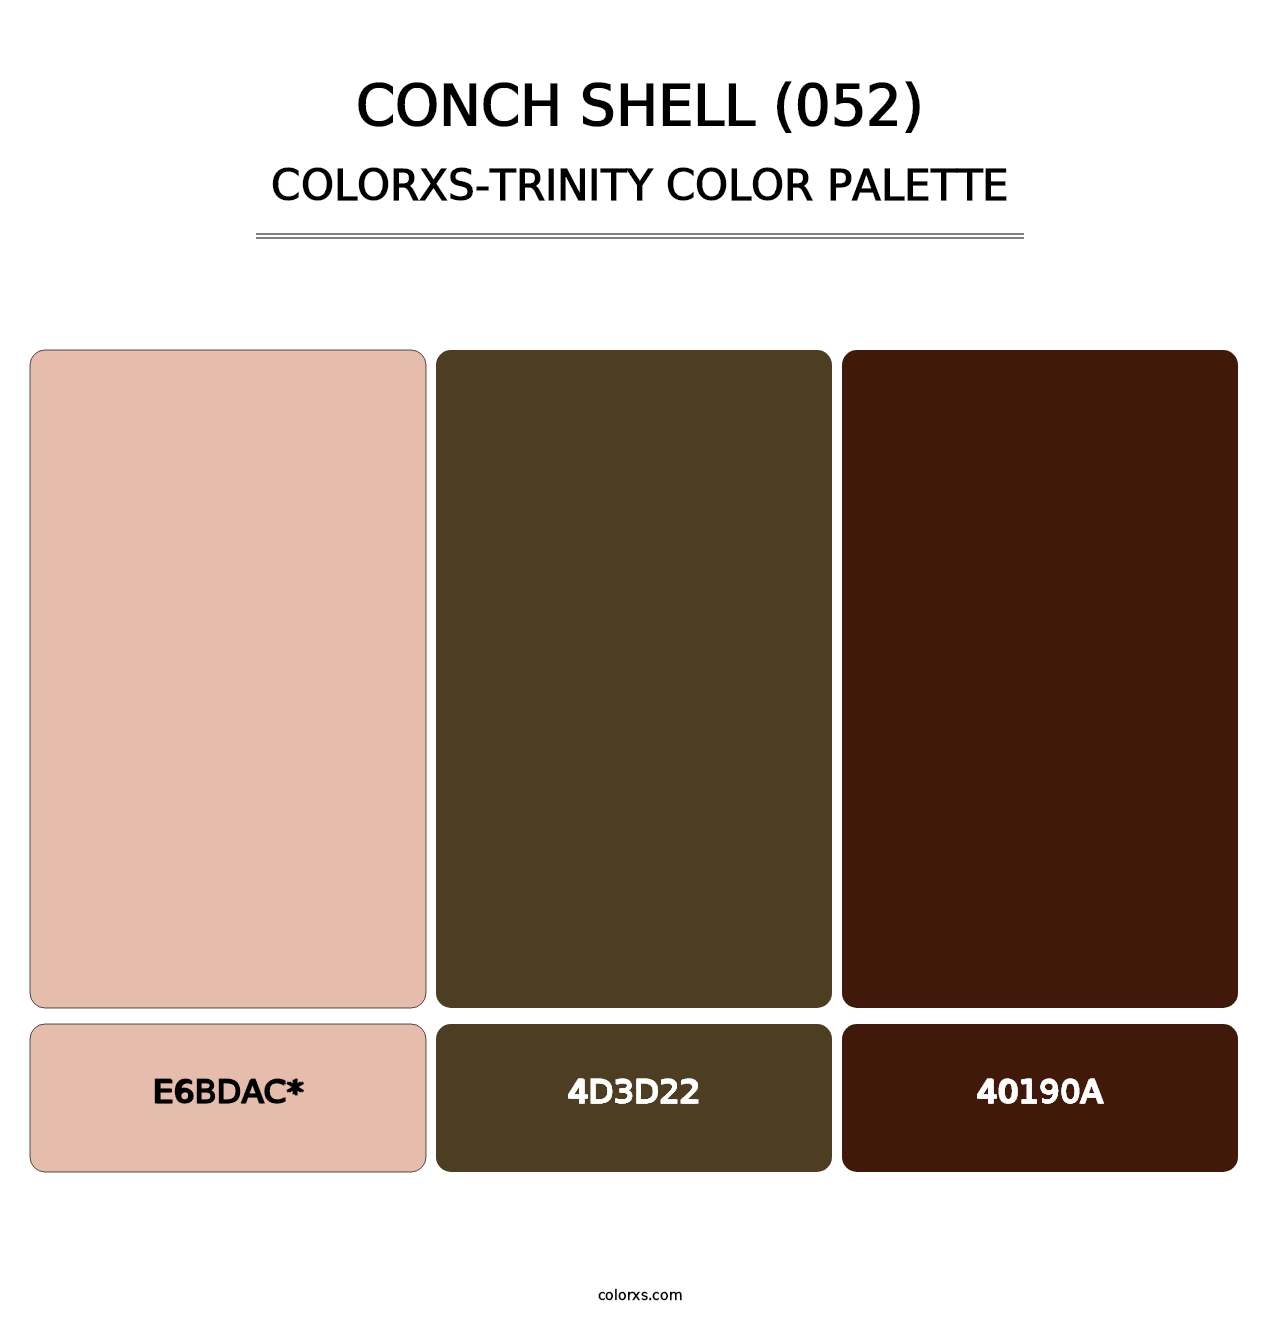 Conch Shell (052) - Colorxs Trinity Palette